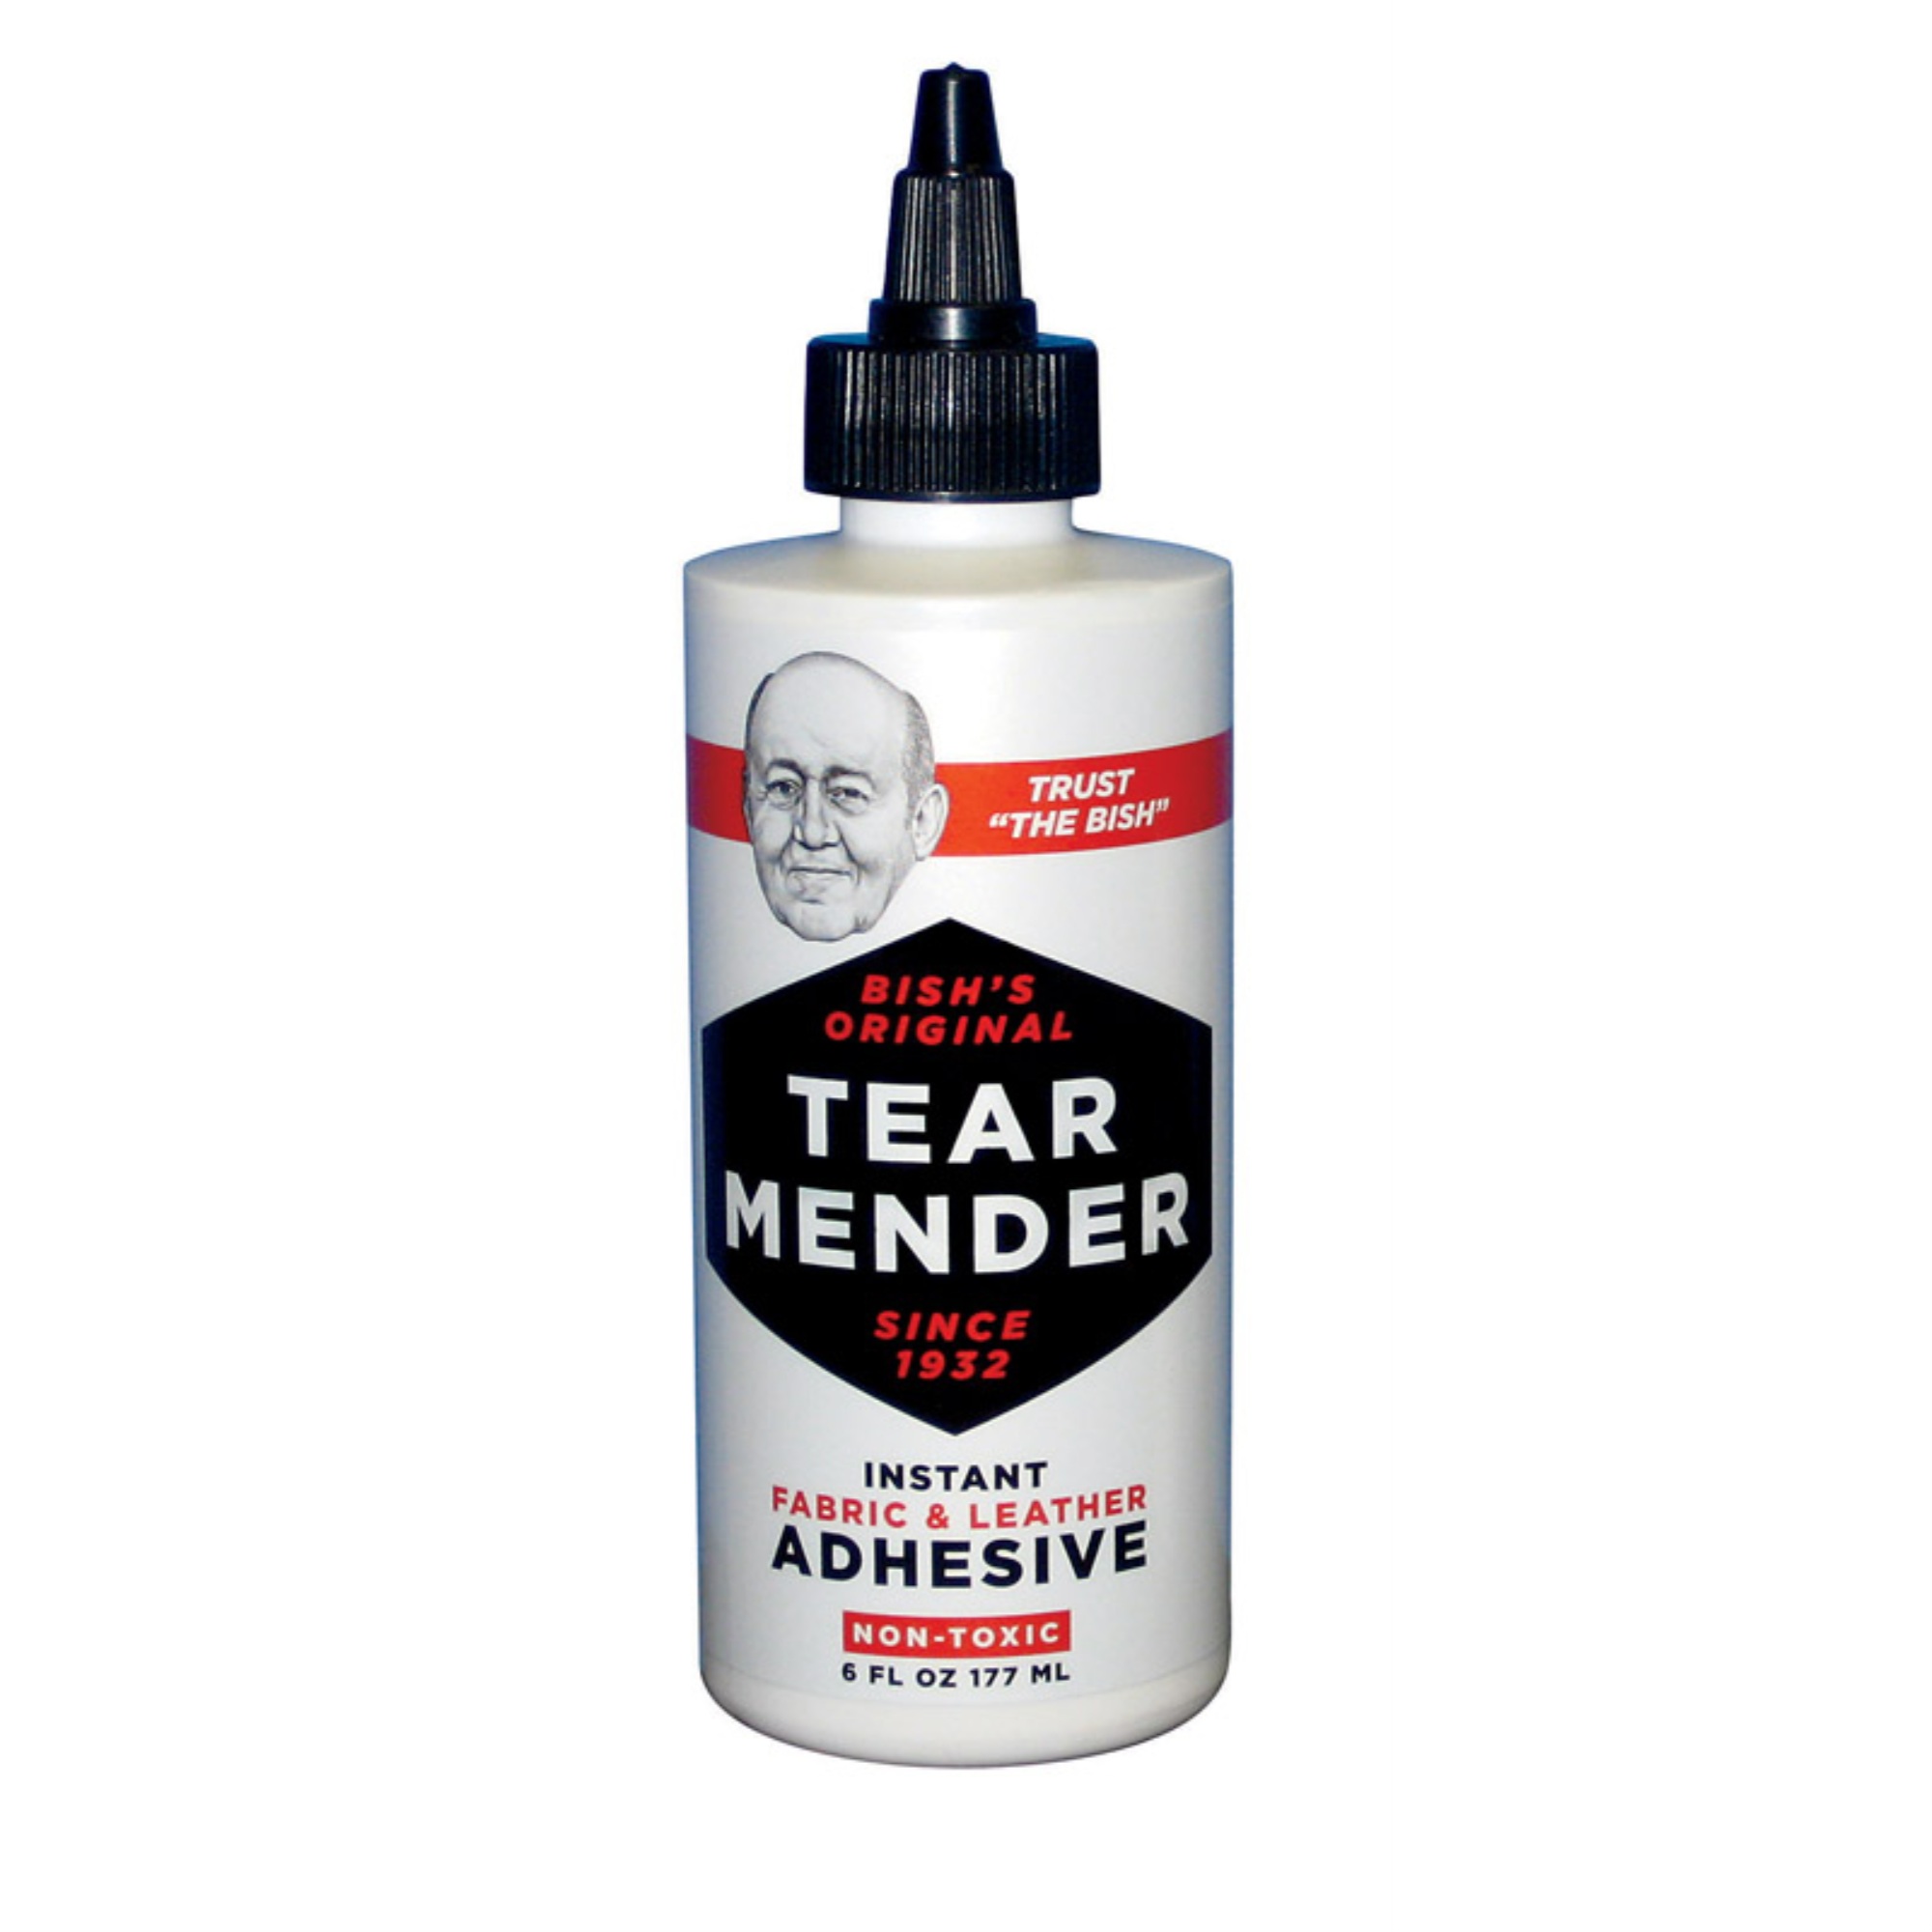 Tear Mender Instant Fabric and Leather Adhesive, 6 oz Bottle, TG-6H - image 1 of 2